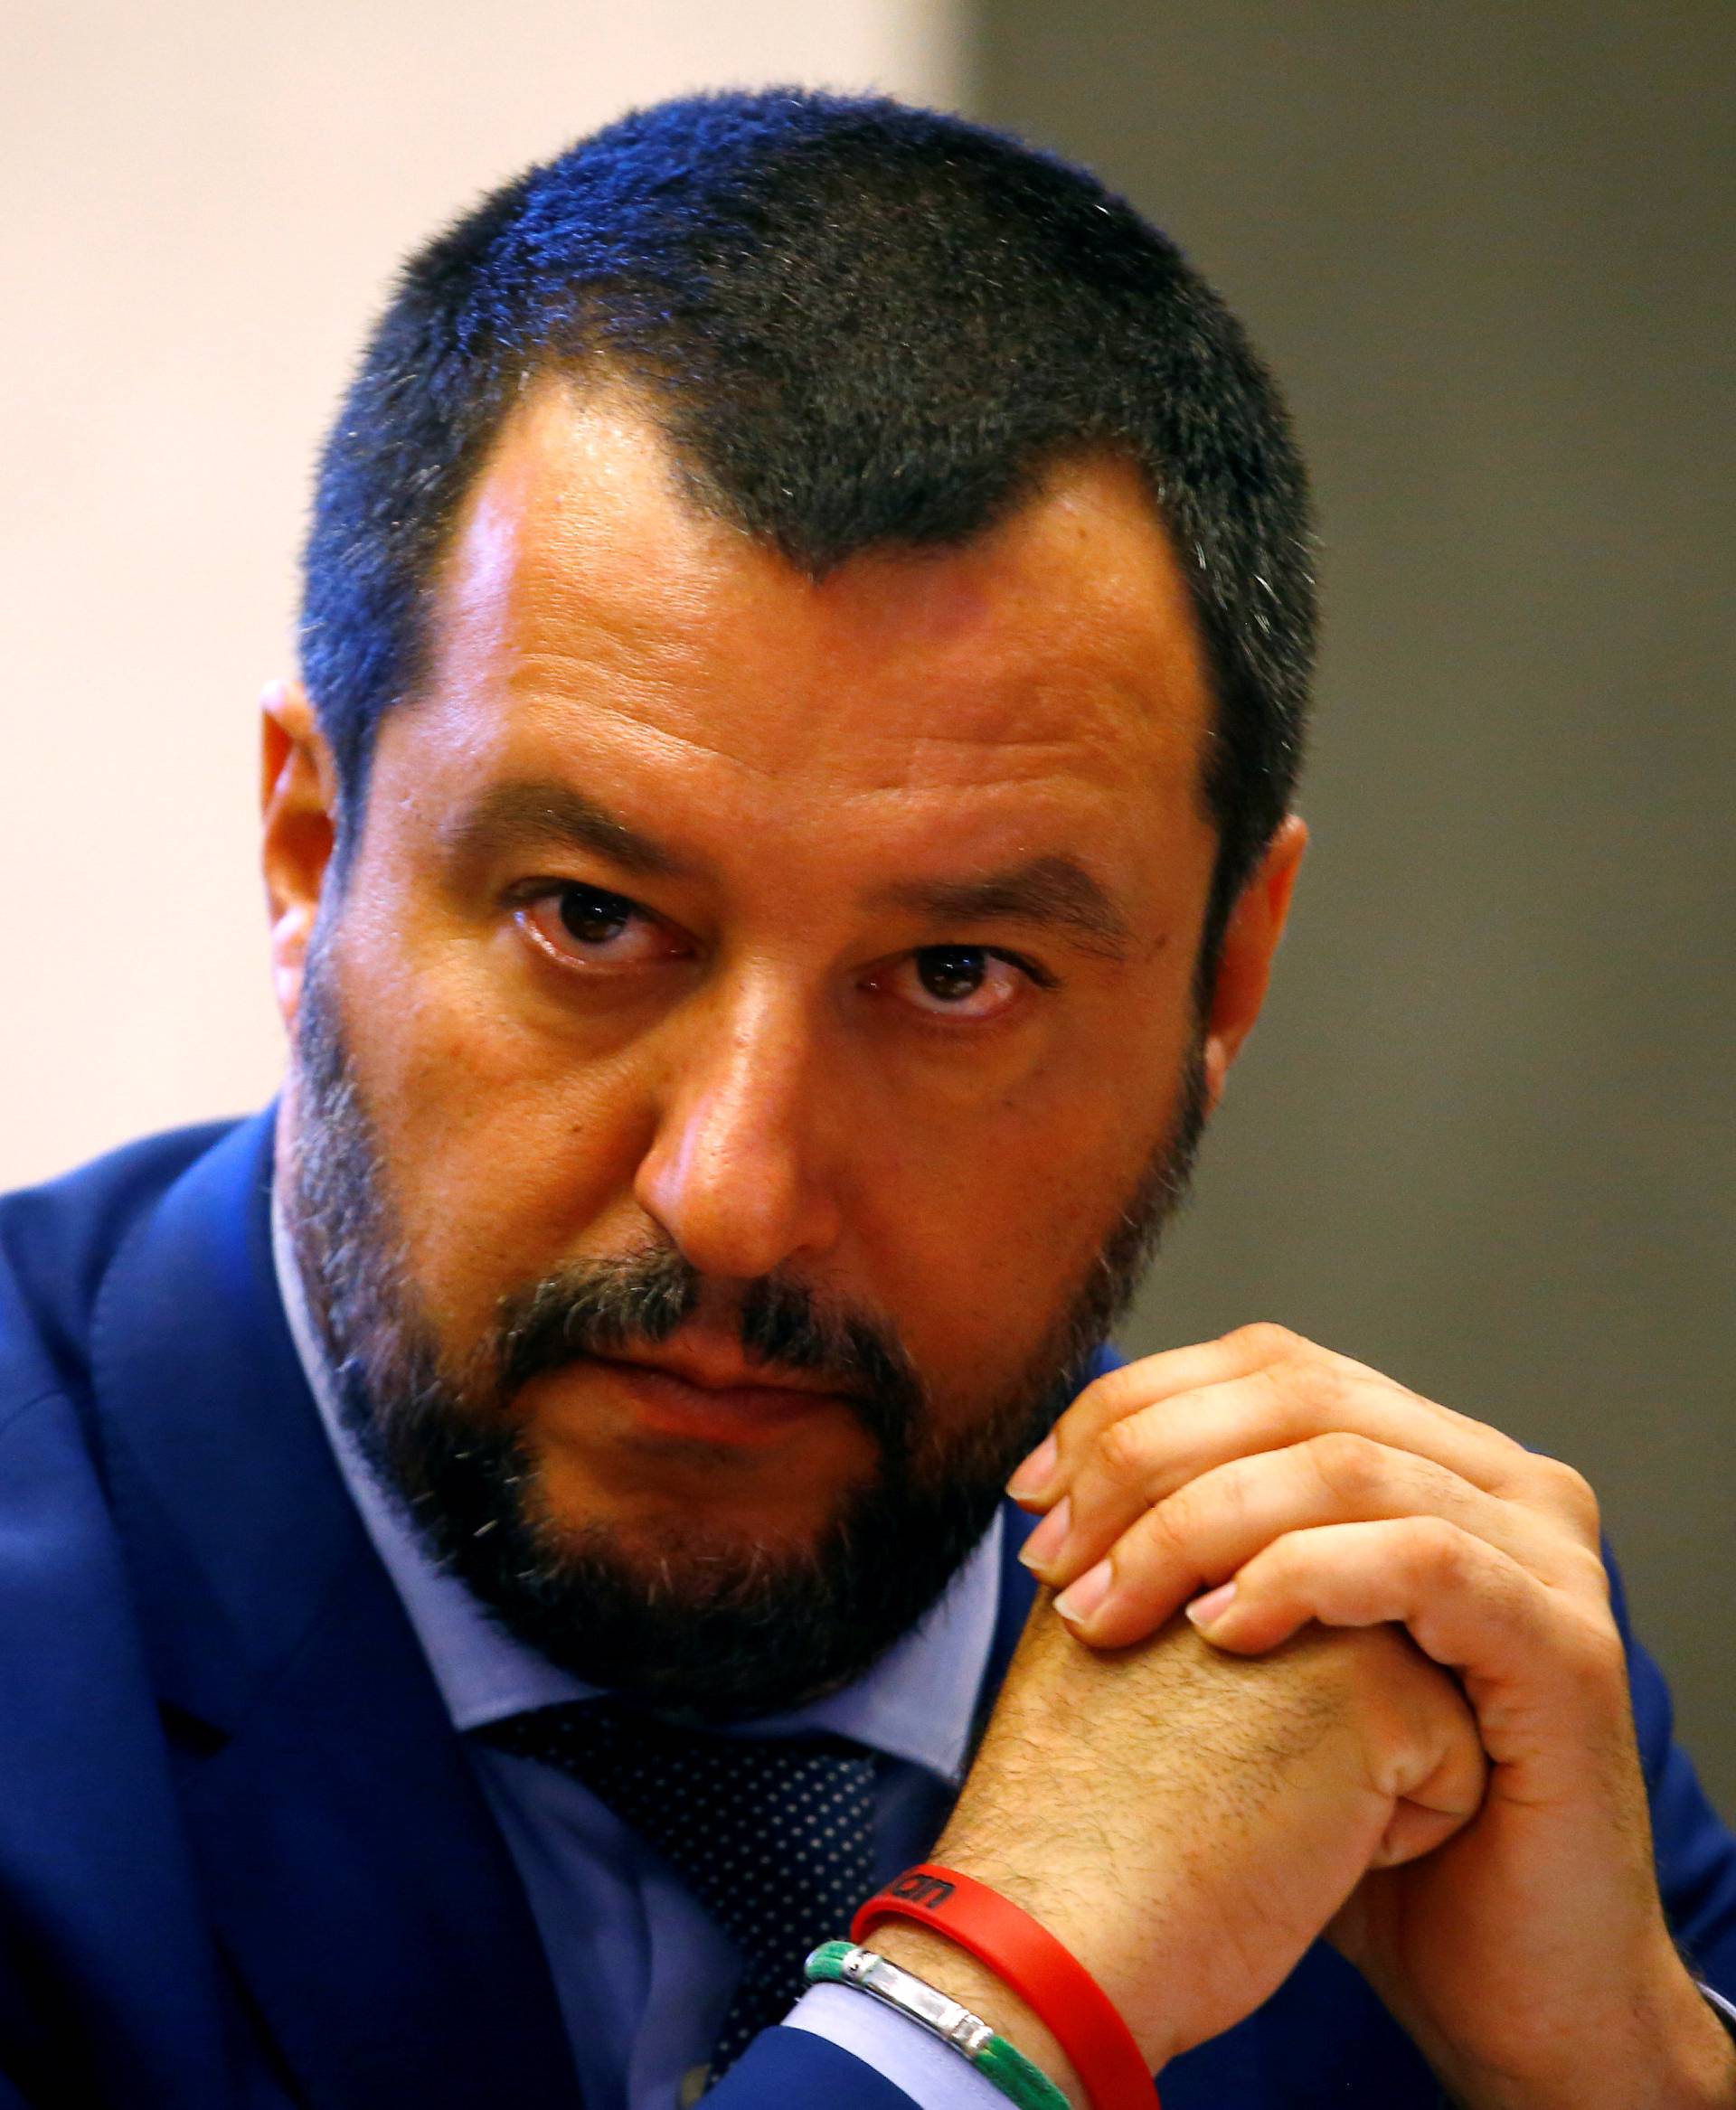 FILE PHOTO: FILE PHOTO: Italy's Interior Minister Matteo Salvini looks on during news conference